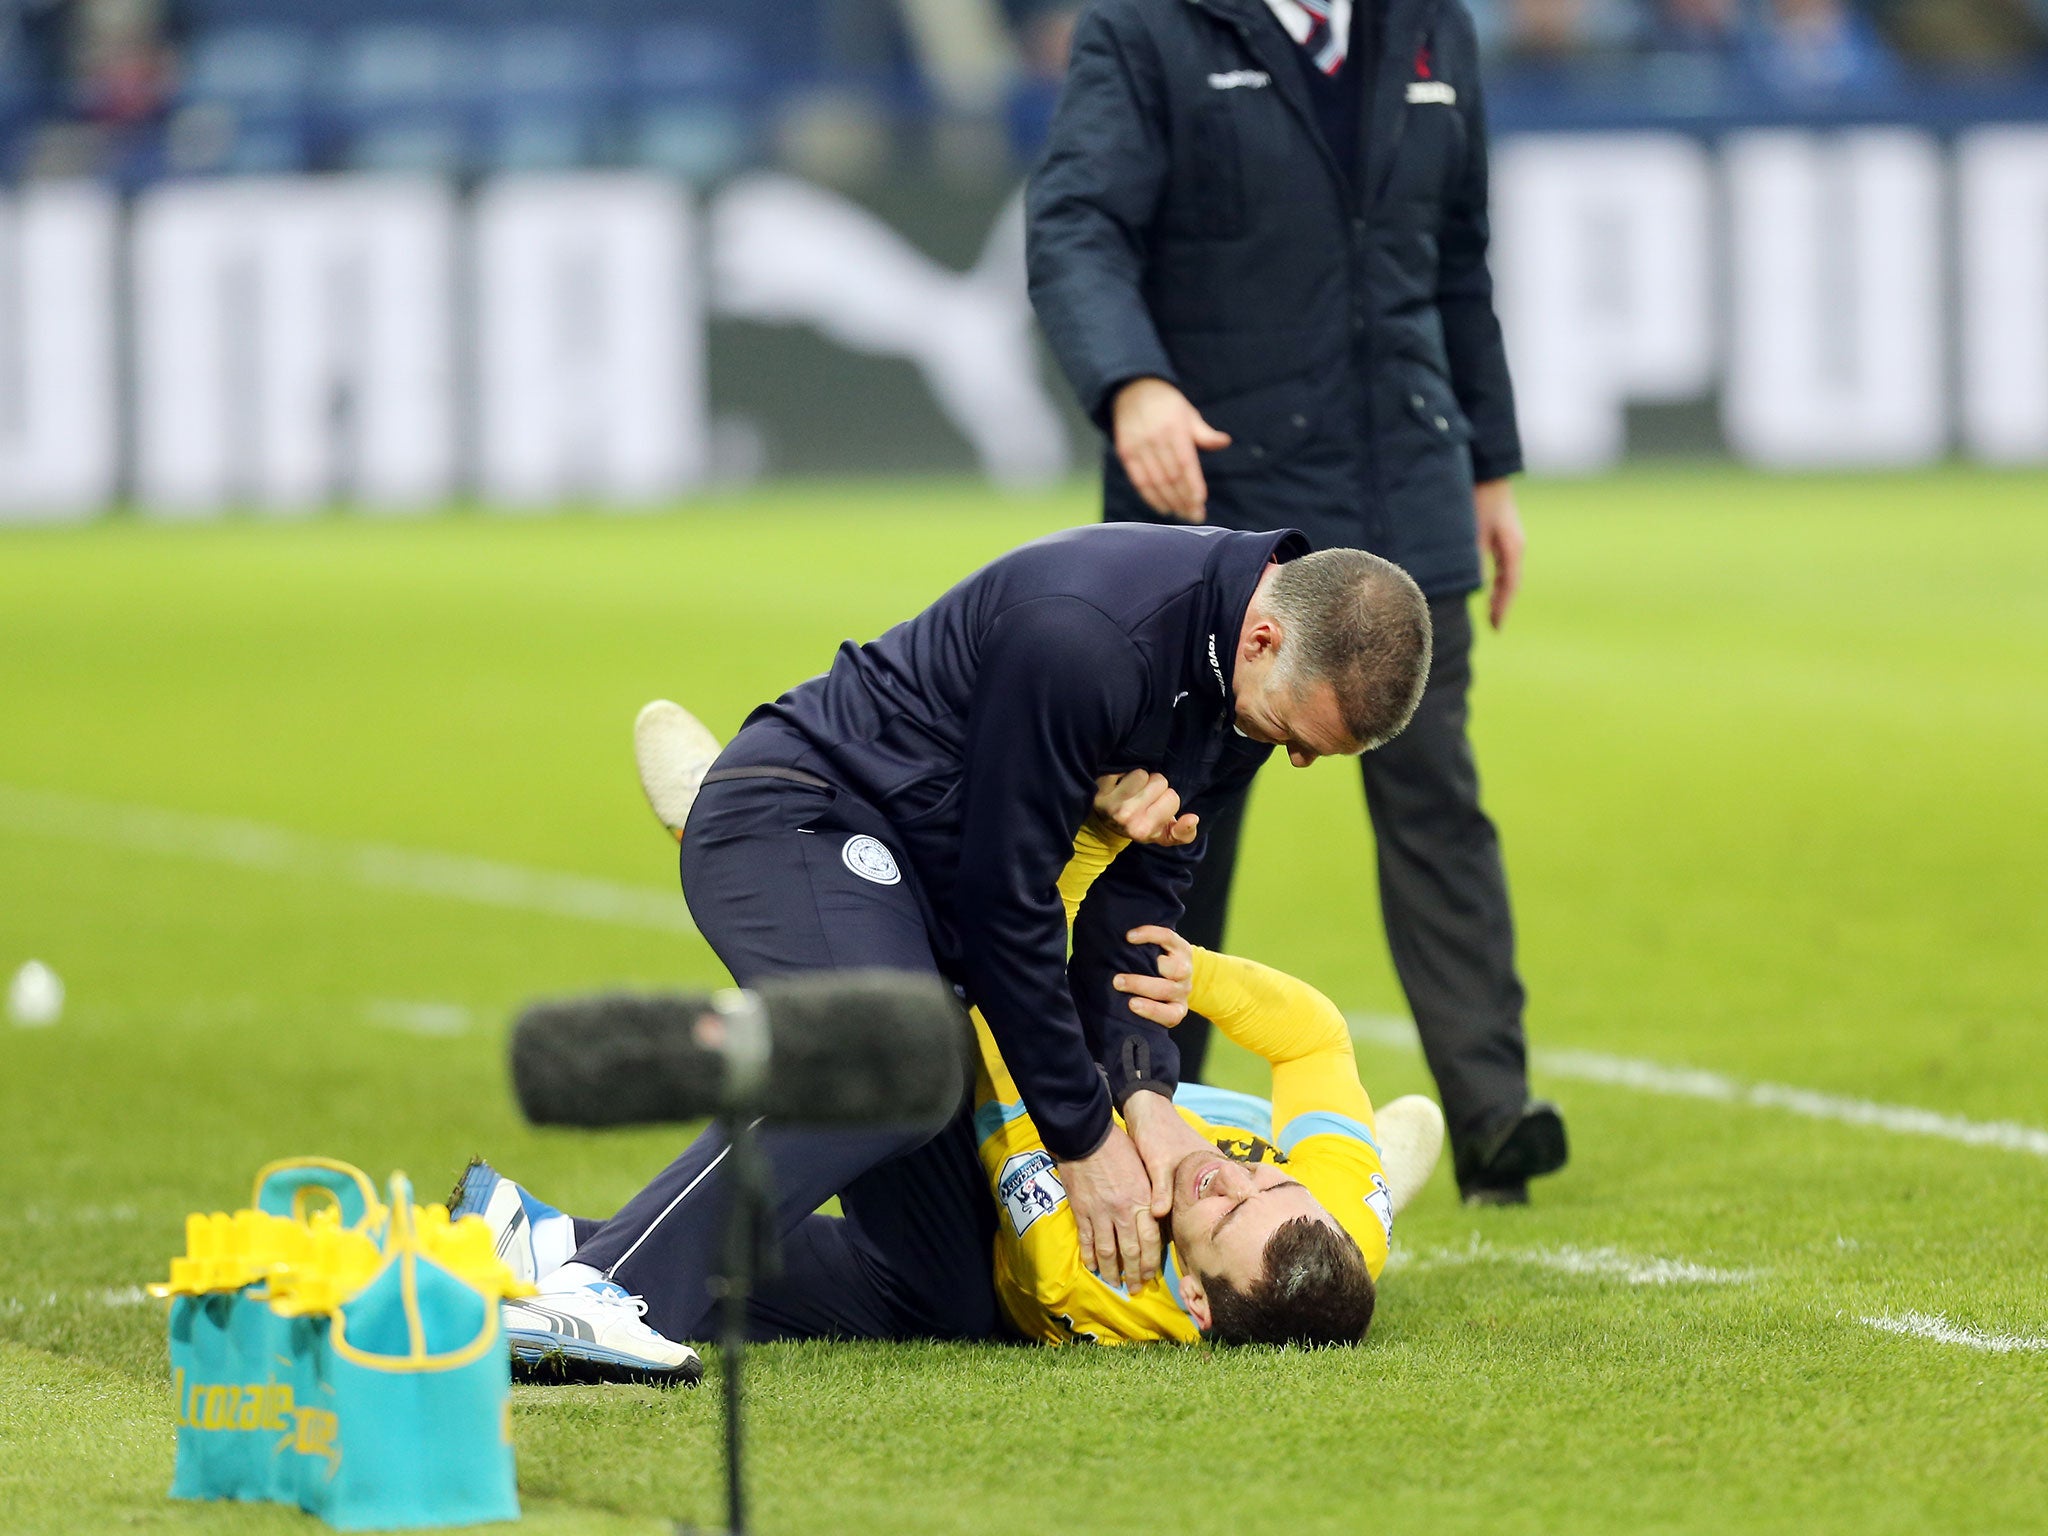 Nigel Pearson and Palace's James McArthur were involved in an altercation on the touchline (Getty)